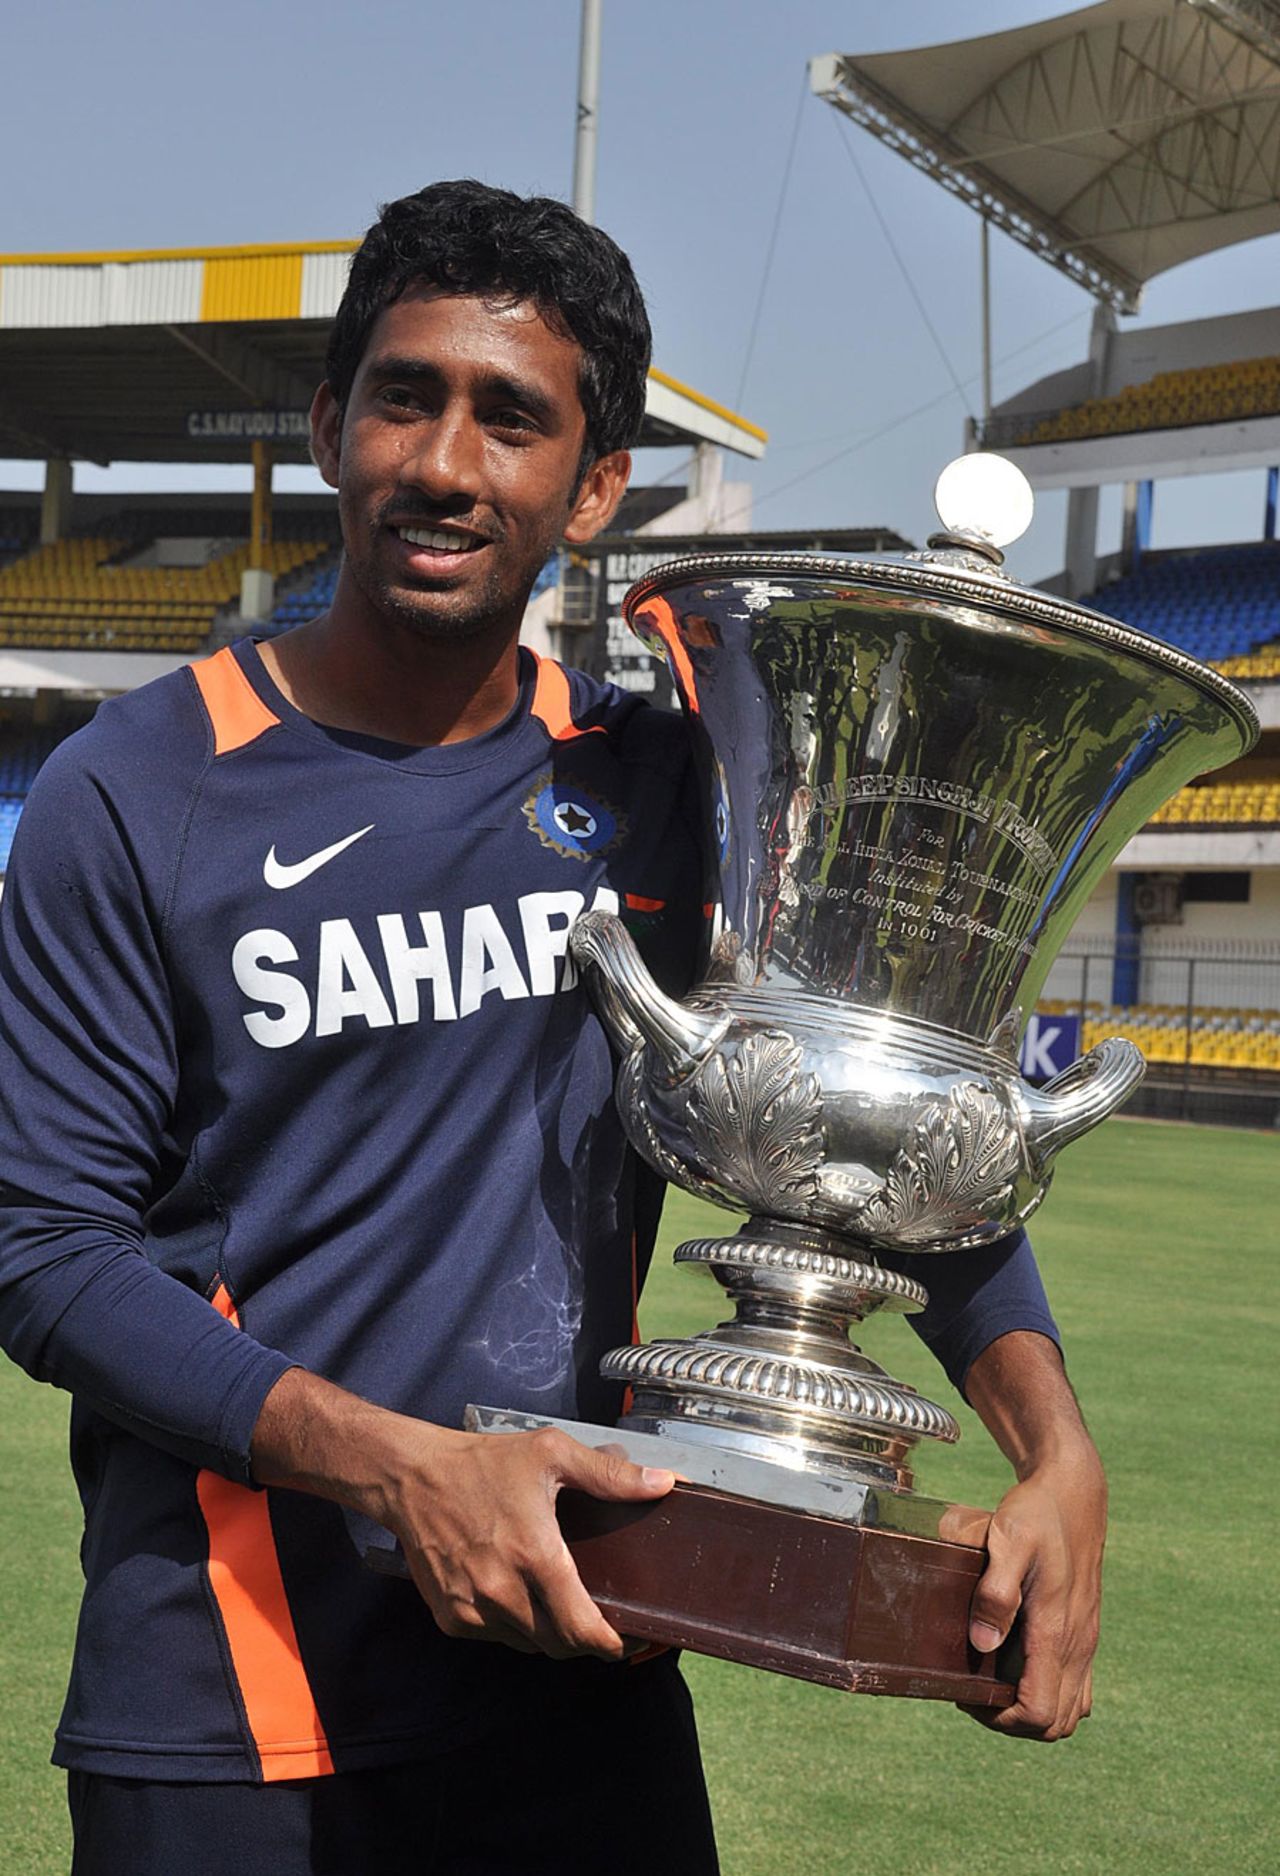 Wriddhiman Saha shows off the Duleep Trophy after East Zone's victory, Duleep Trophy, Central Zone v East Zone, Indore, 3rd day, February 14, 2012